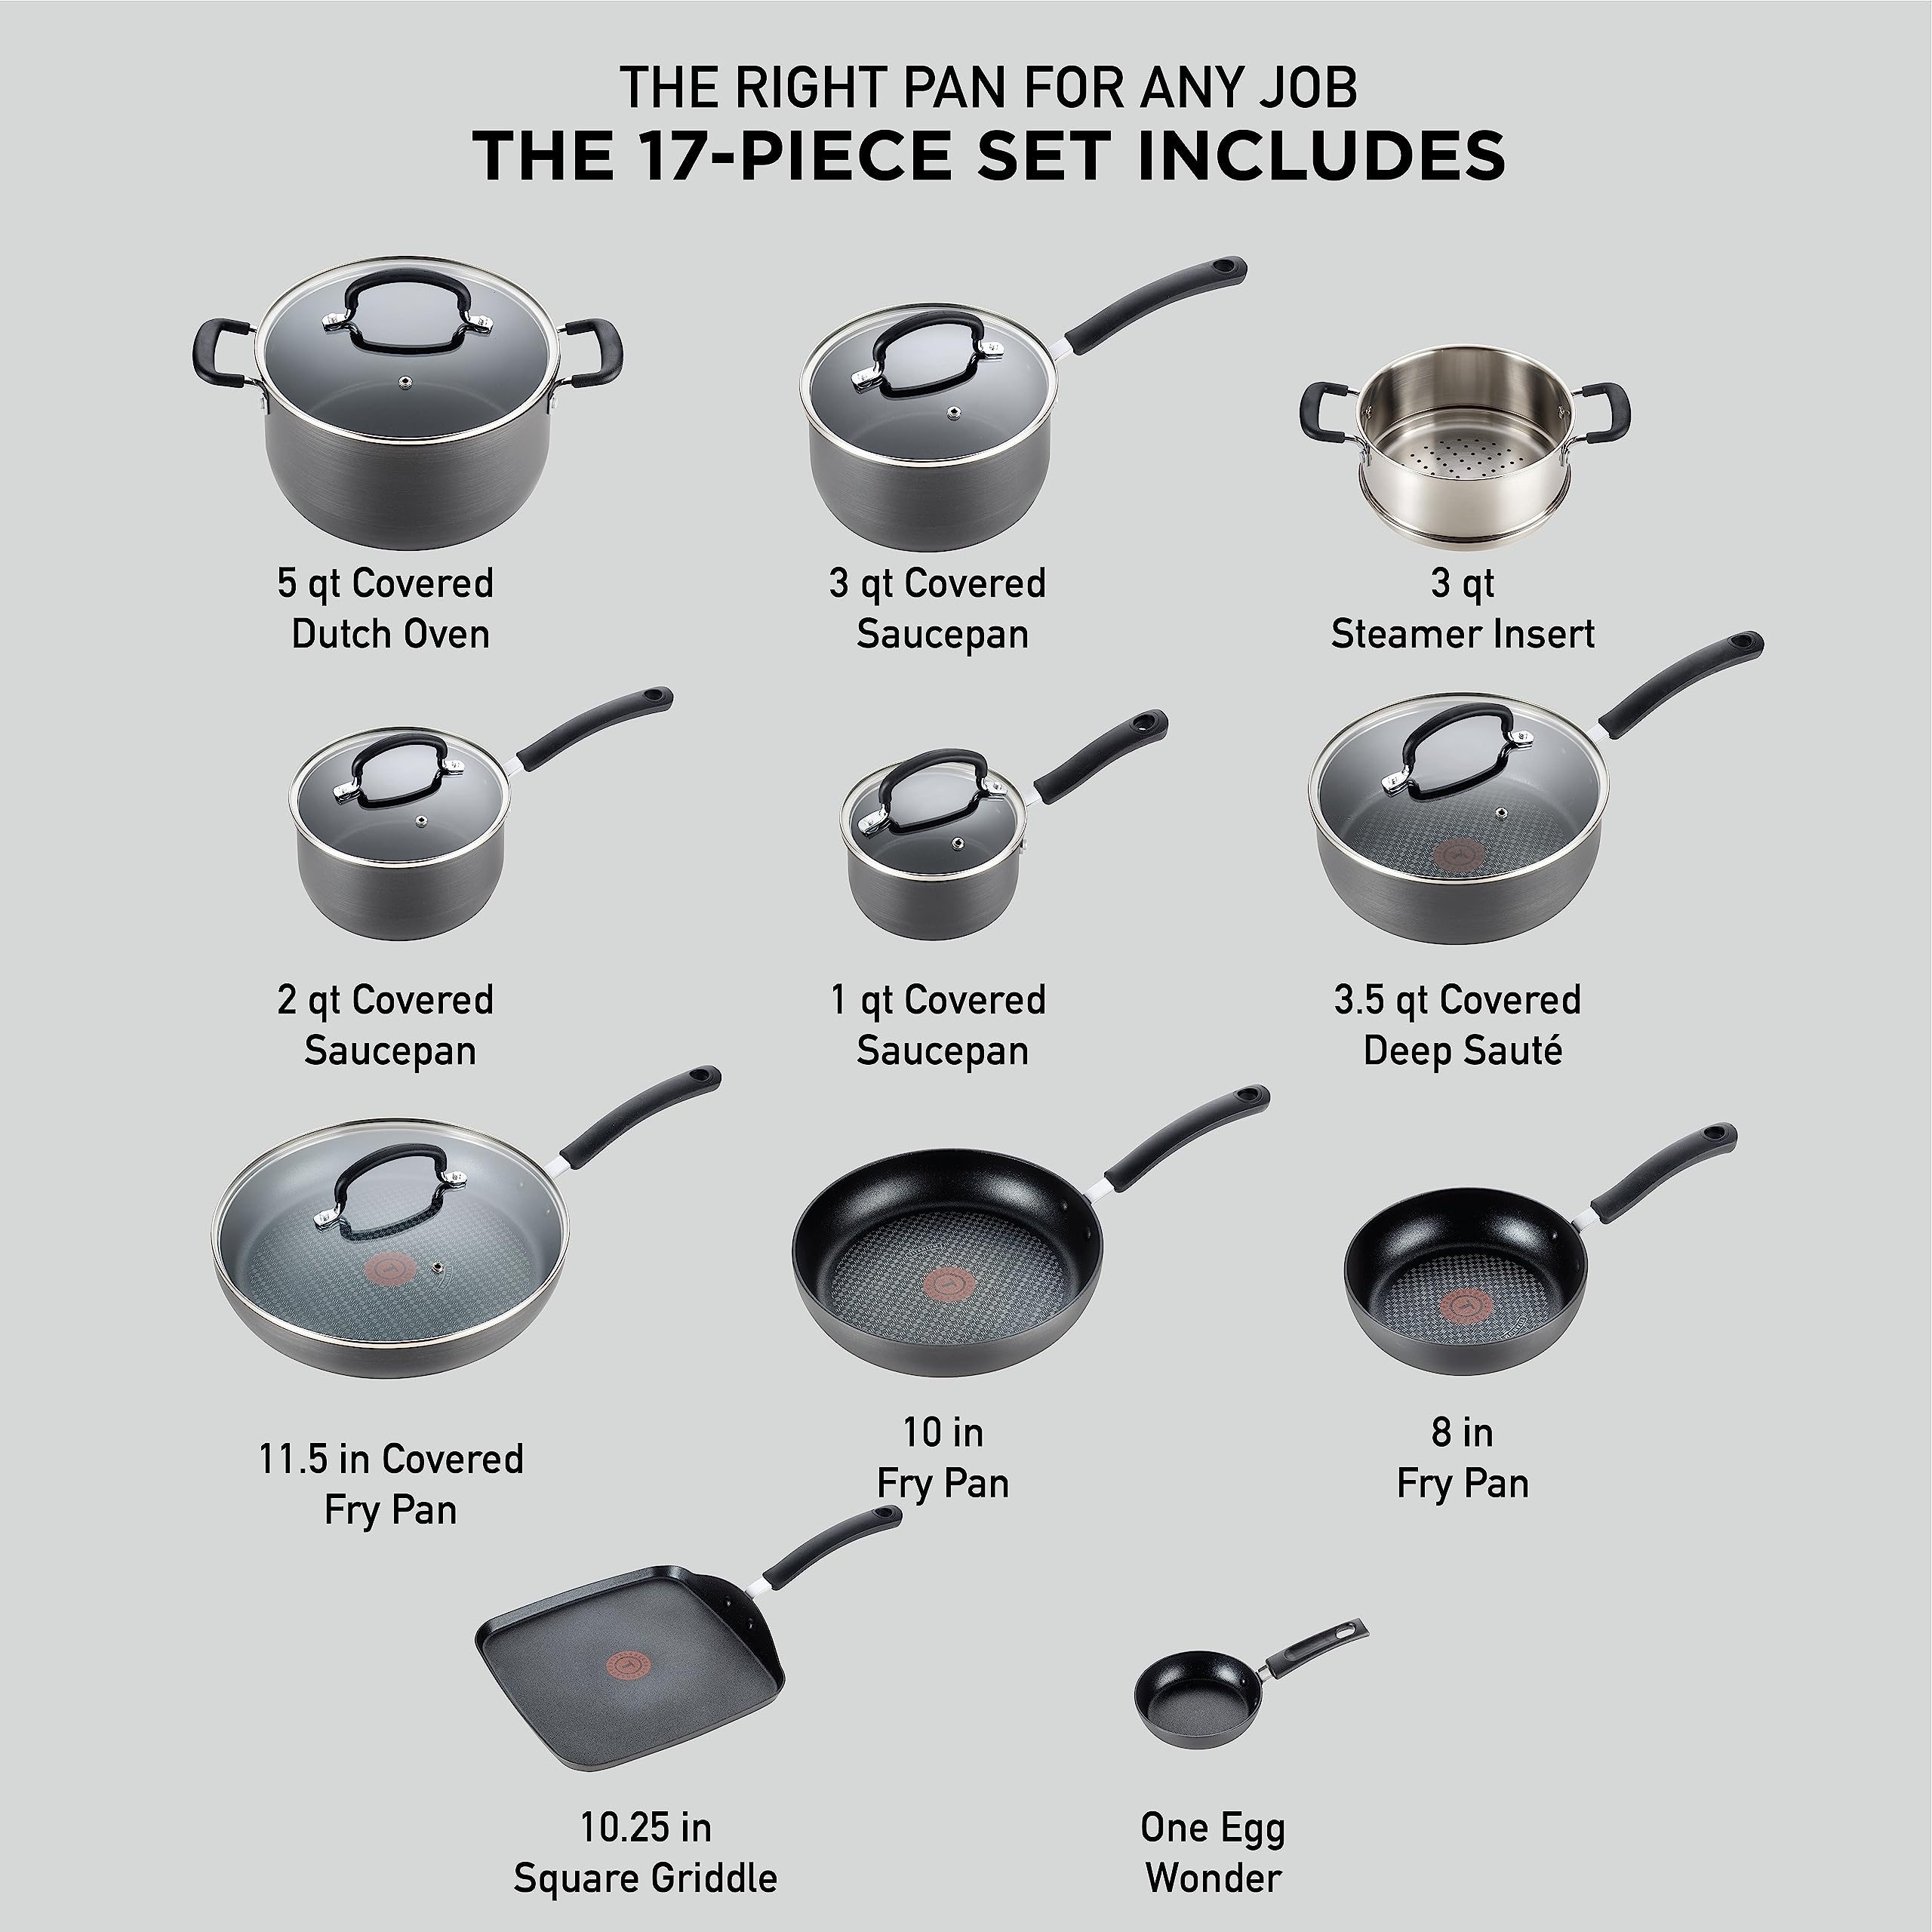 https://ak1.ostkcdn.com/images/products/is/images/direct/0f0aa1cf917683dff3122a782afcb57303de81e6/Ultimate-Hard-Anodized-Nonstick-Cookware-Set-17-Piece-Pots-and-Pans%2C-Dishwasher-Safe-Black.jpg